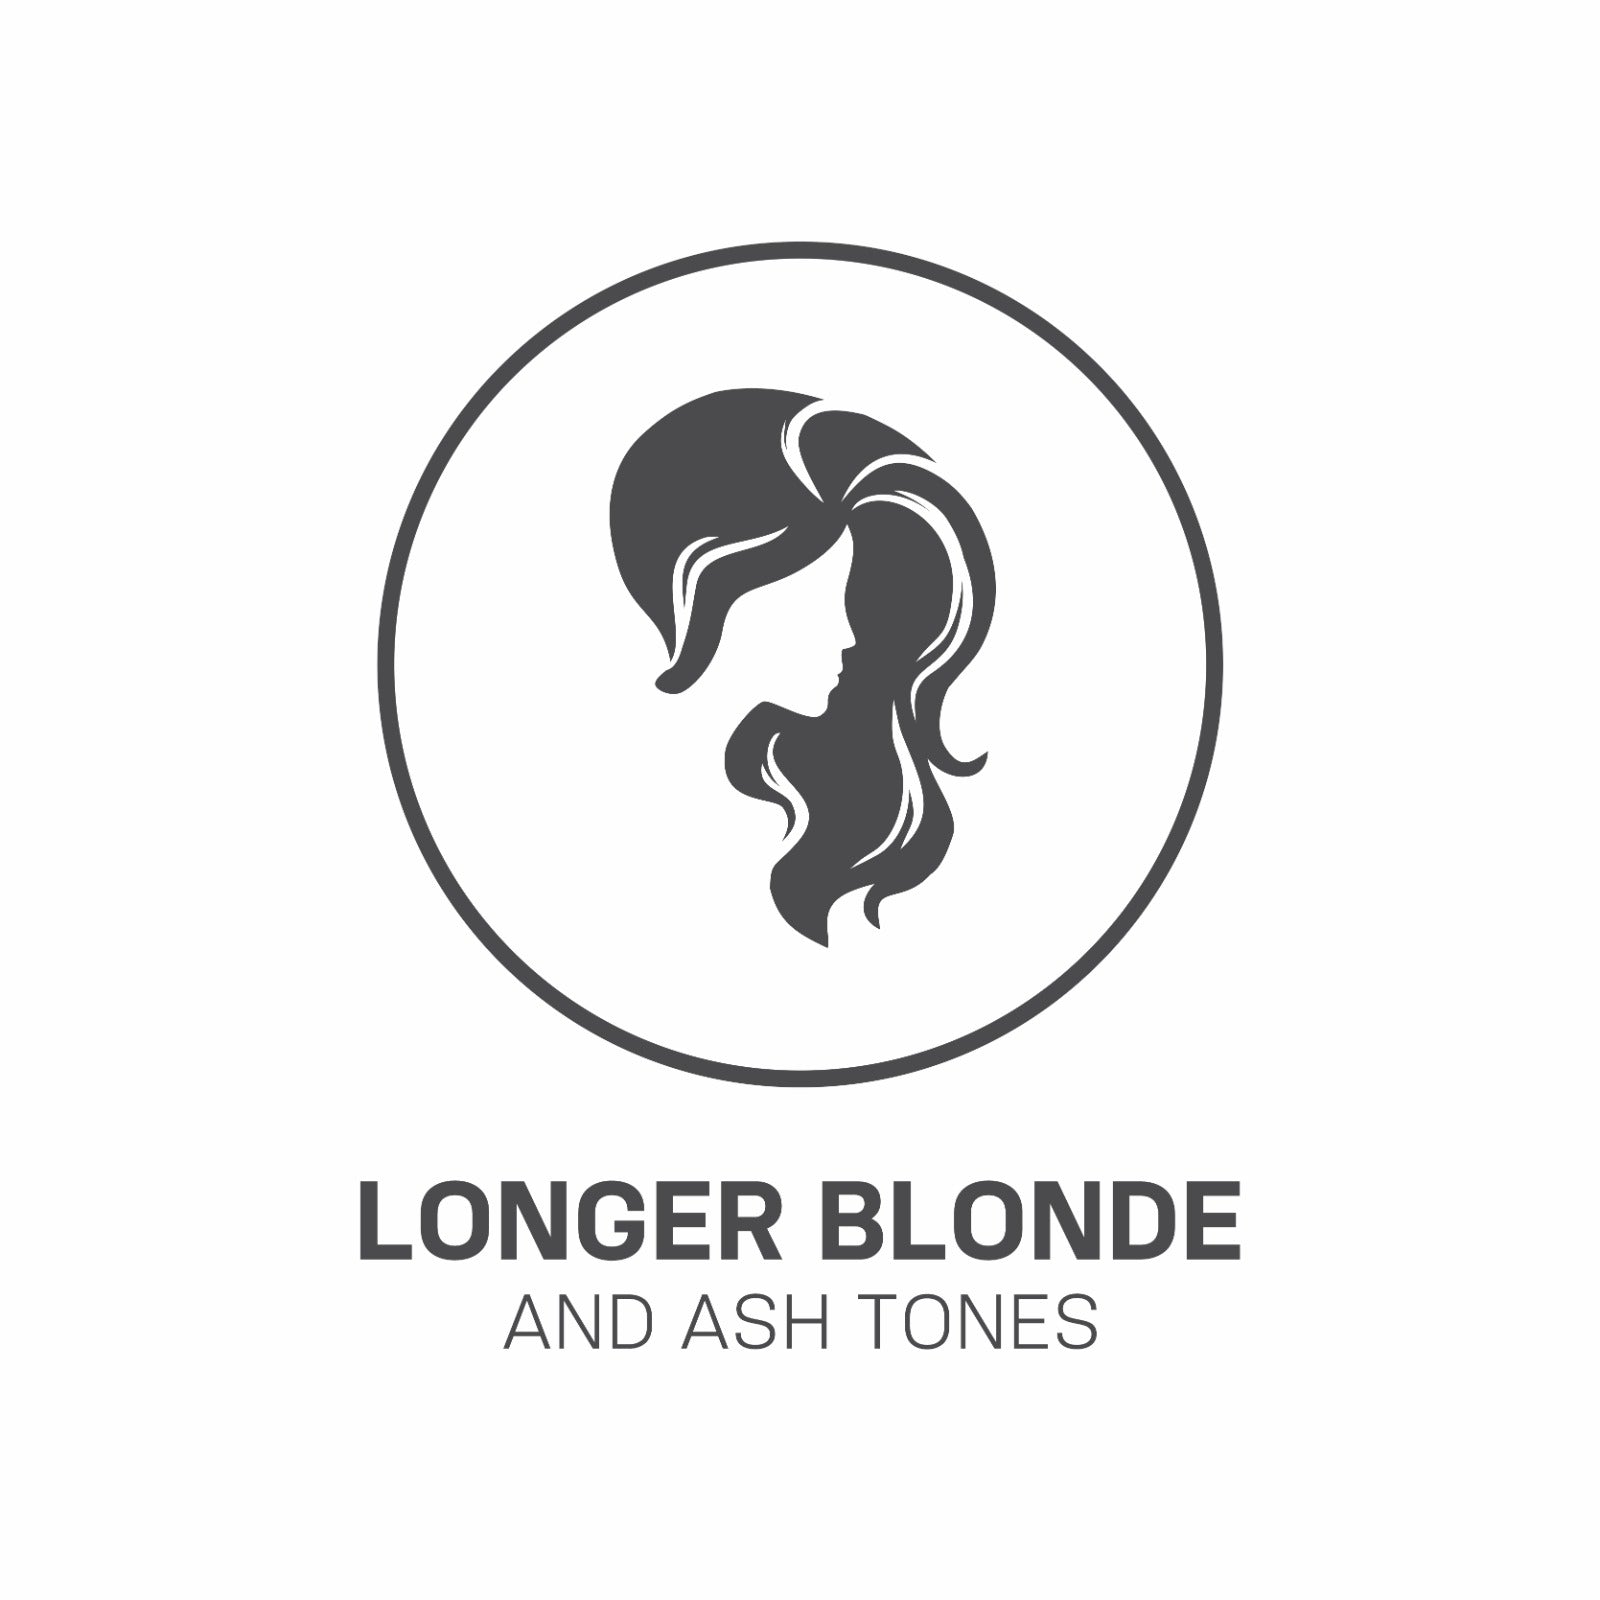 Make your ash and blonde tones stay longer